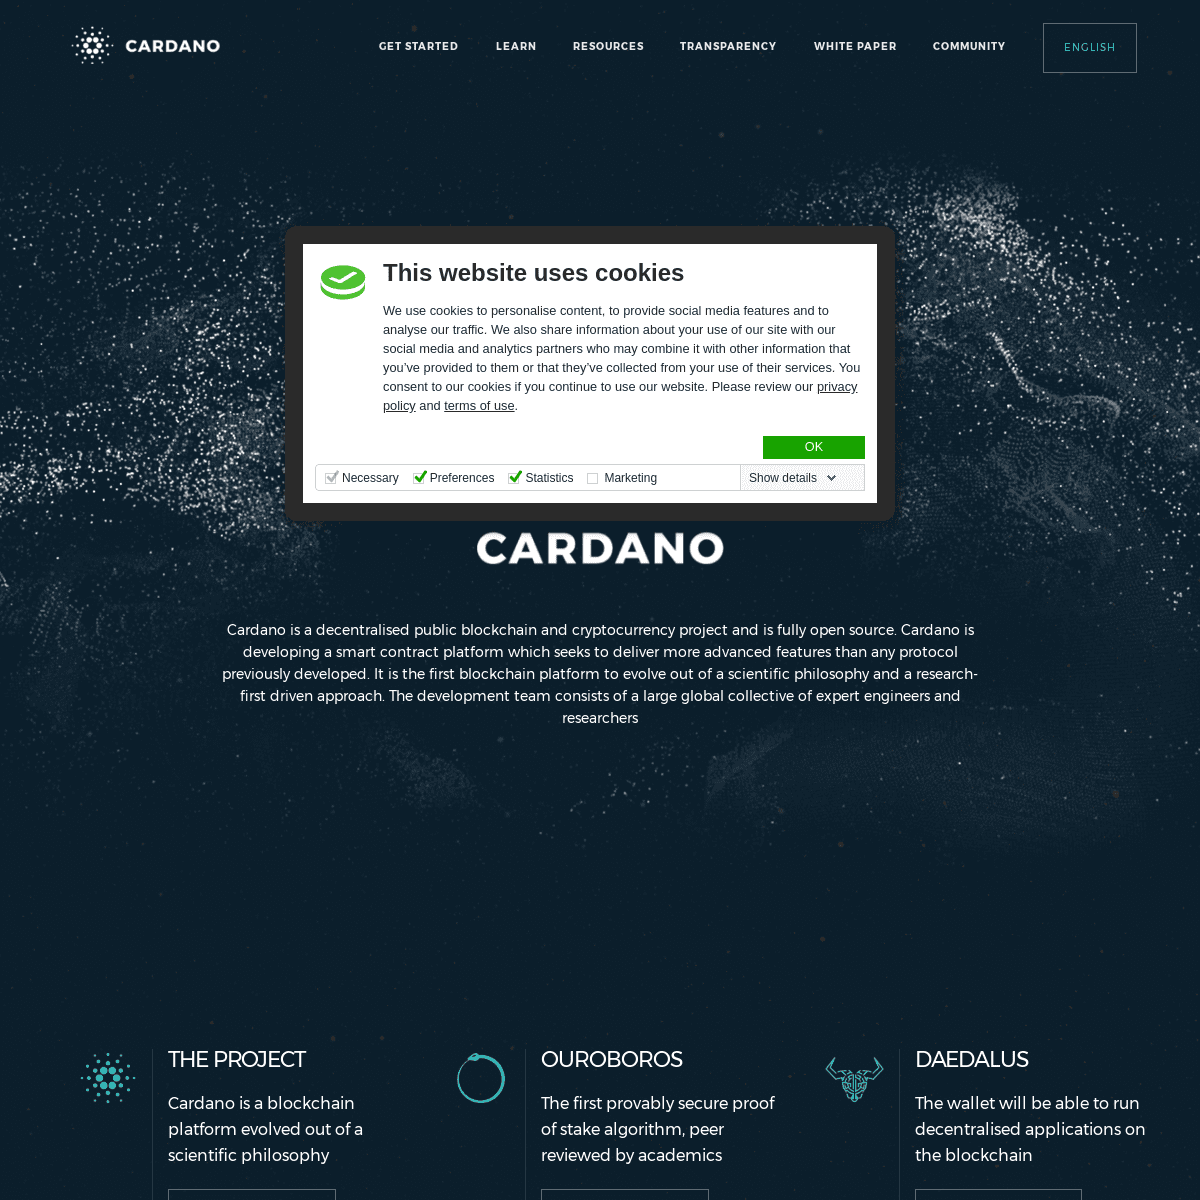 A complete backup of cardano.org